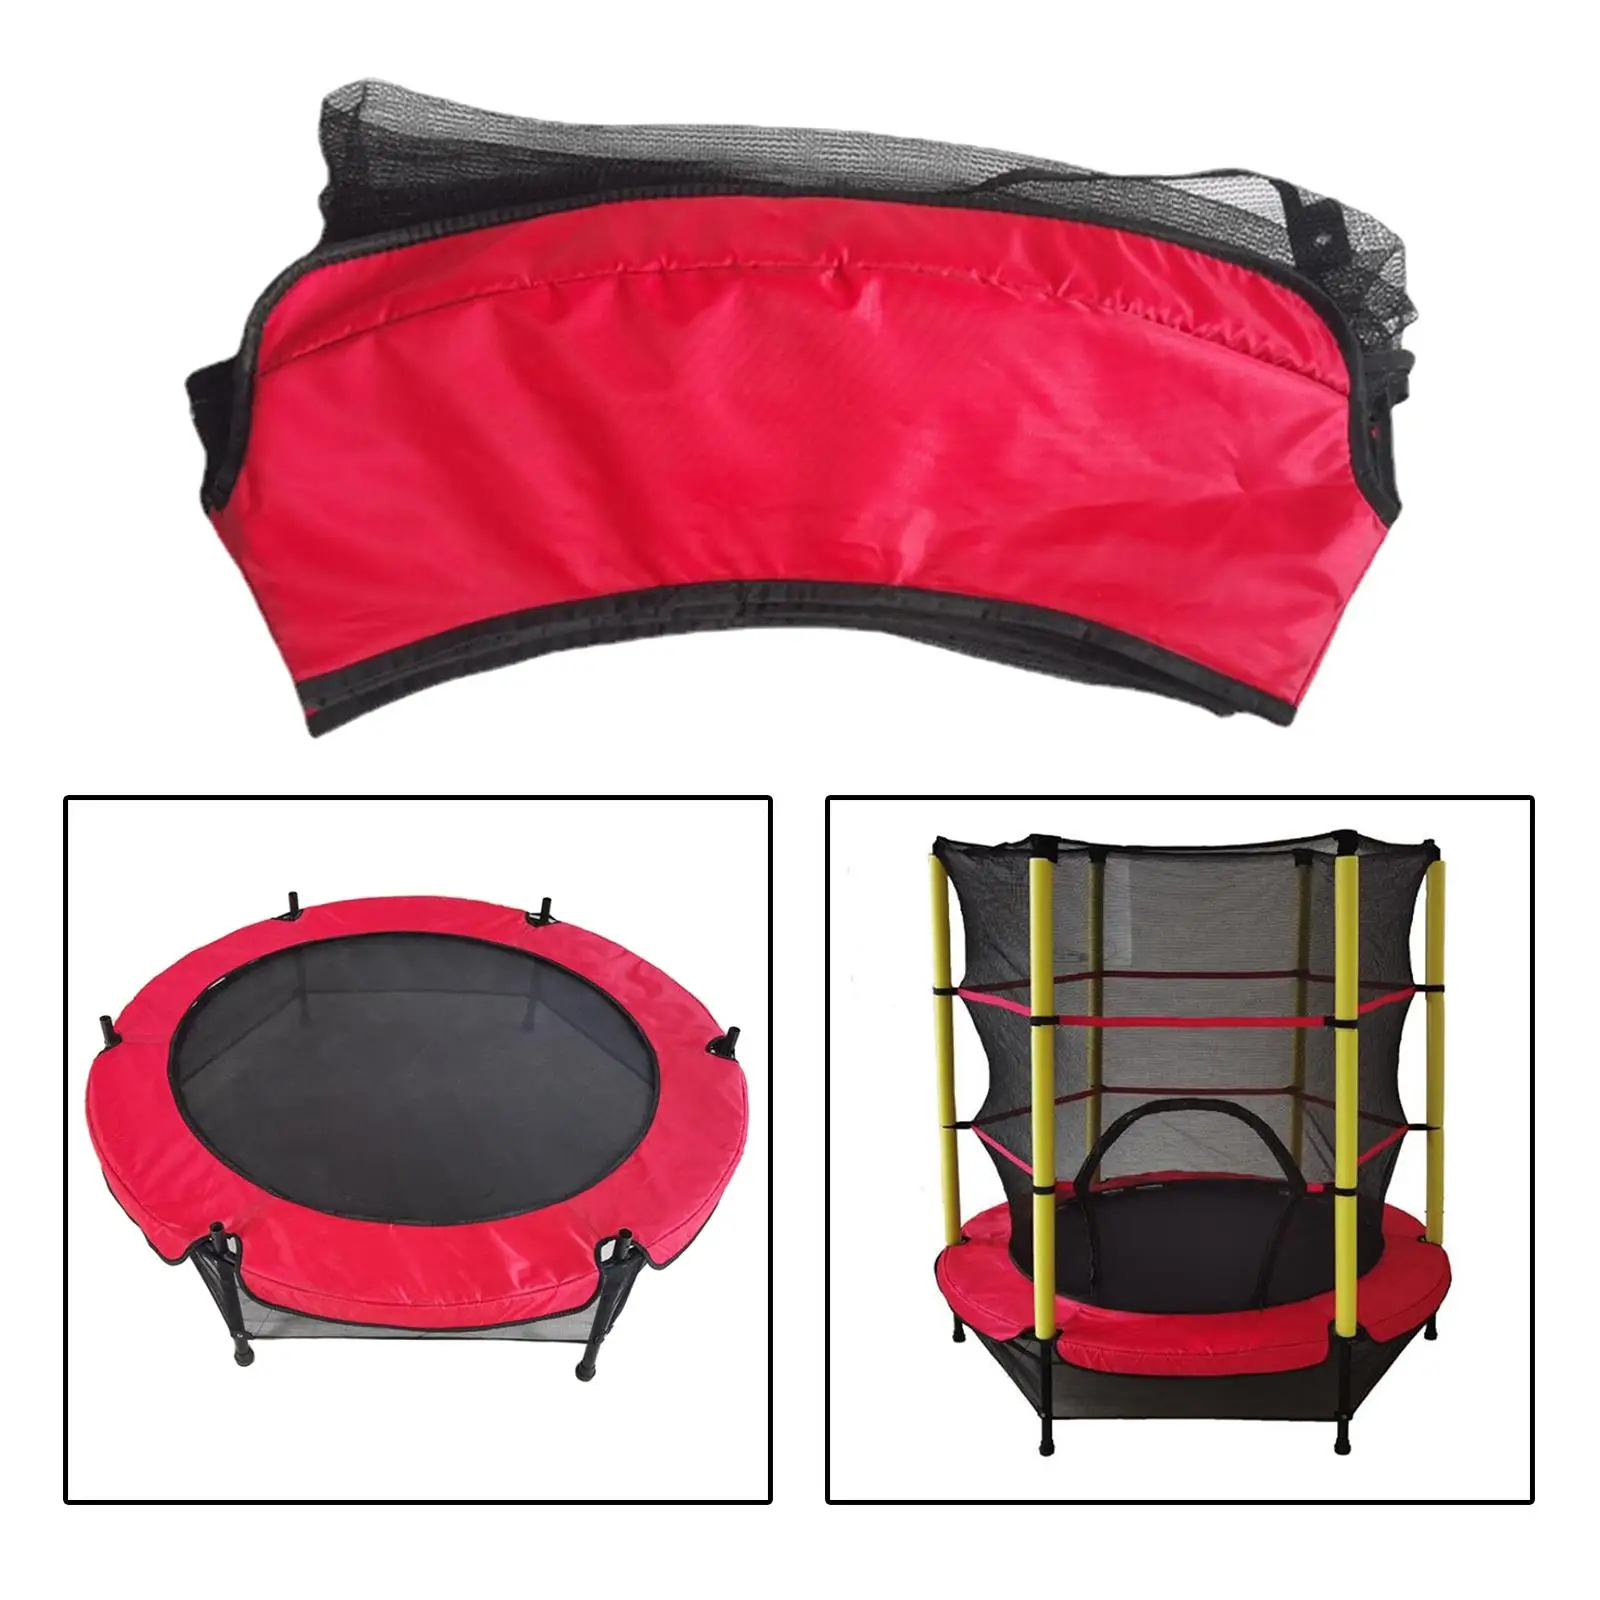 Trampoline Safety Pad Mat, Waterproof Padded Frame Edge Protection Folding Spring Cover for Play Exercise Home